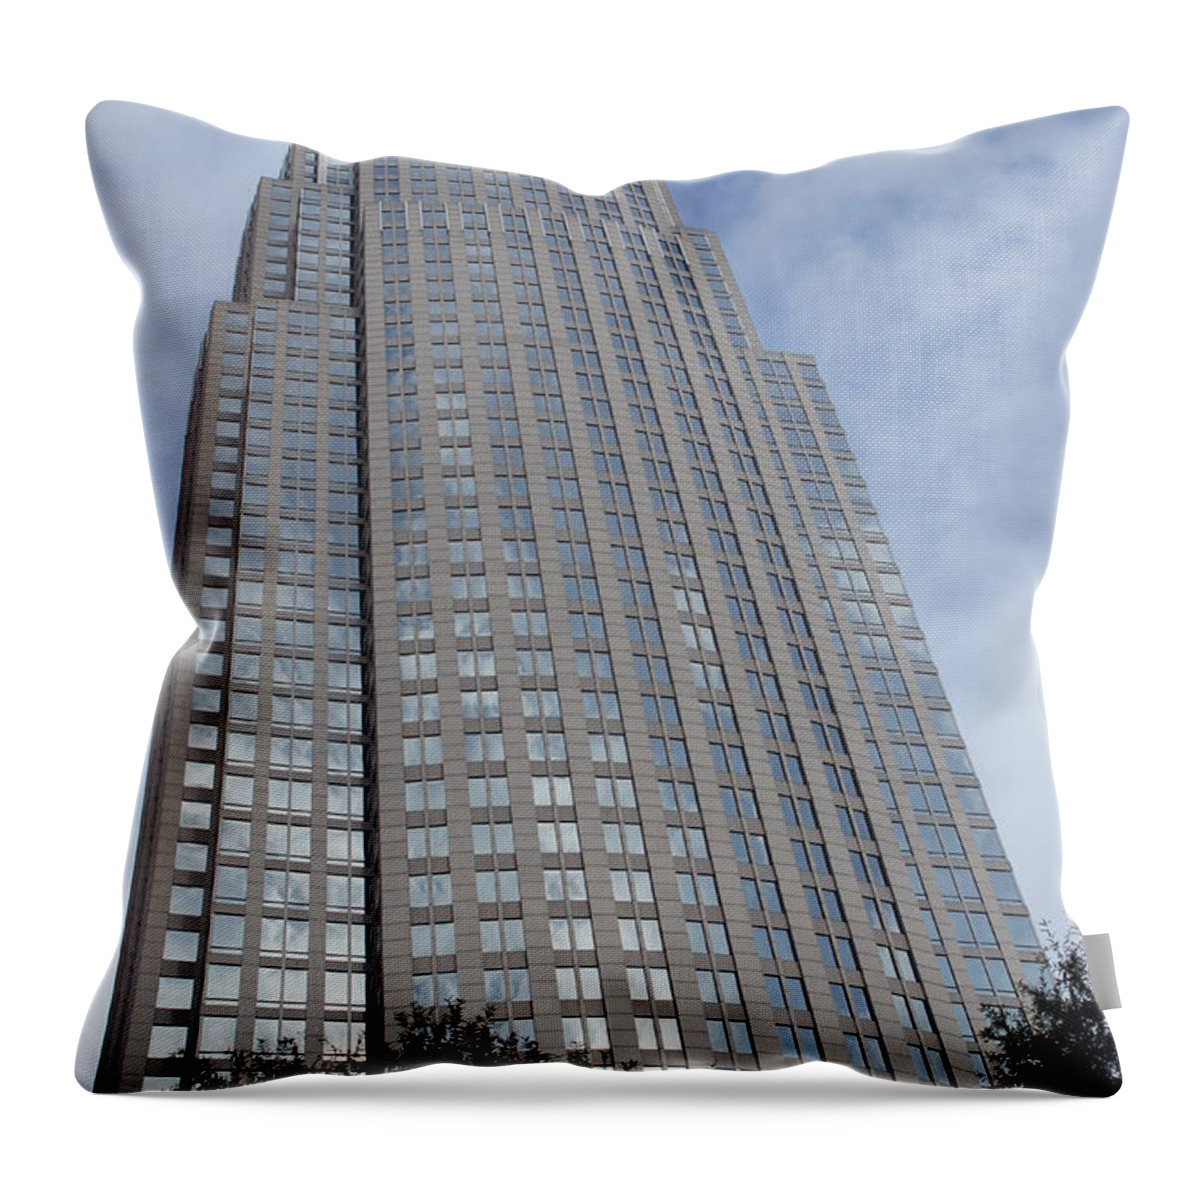 Photograph Throw Pillow featuring the photograph Bank of America by M Three Photos